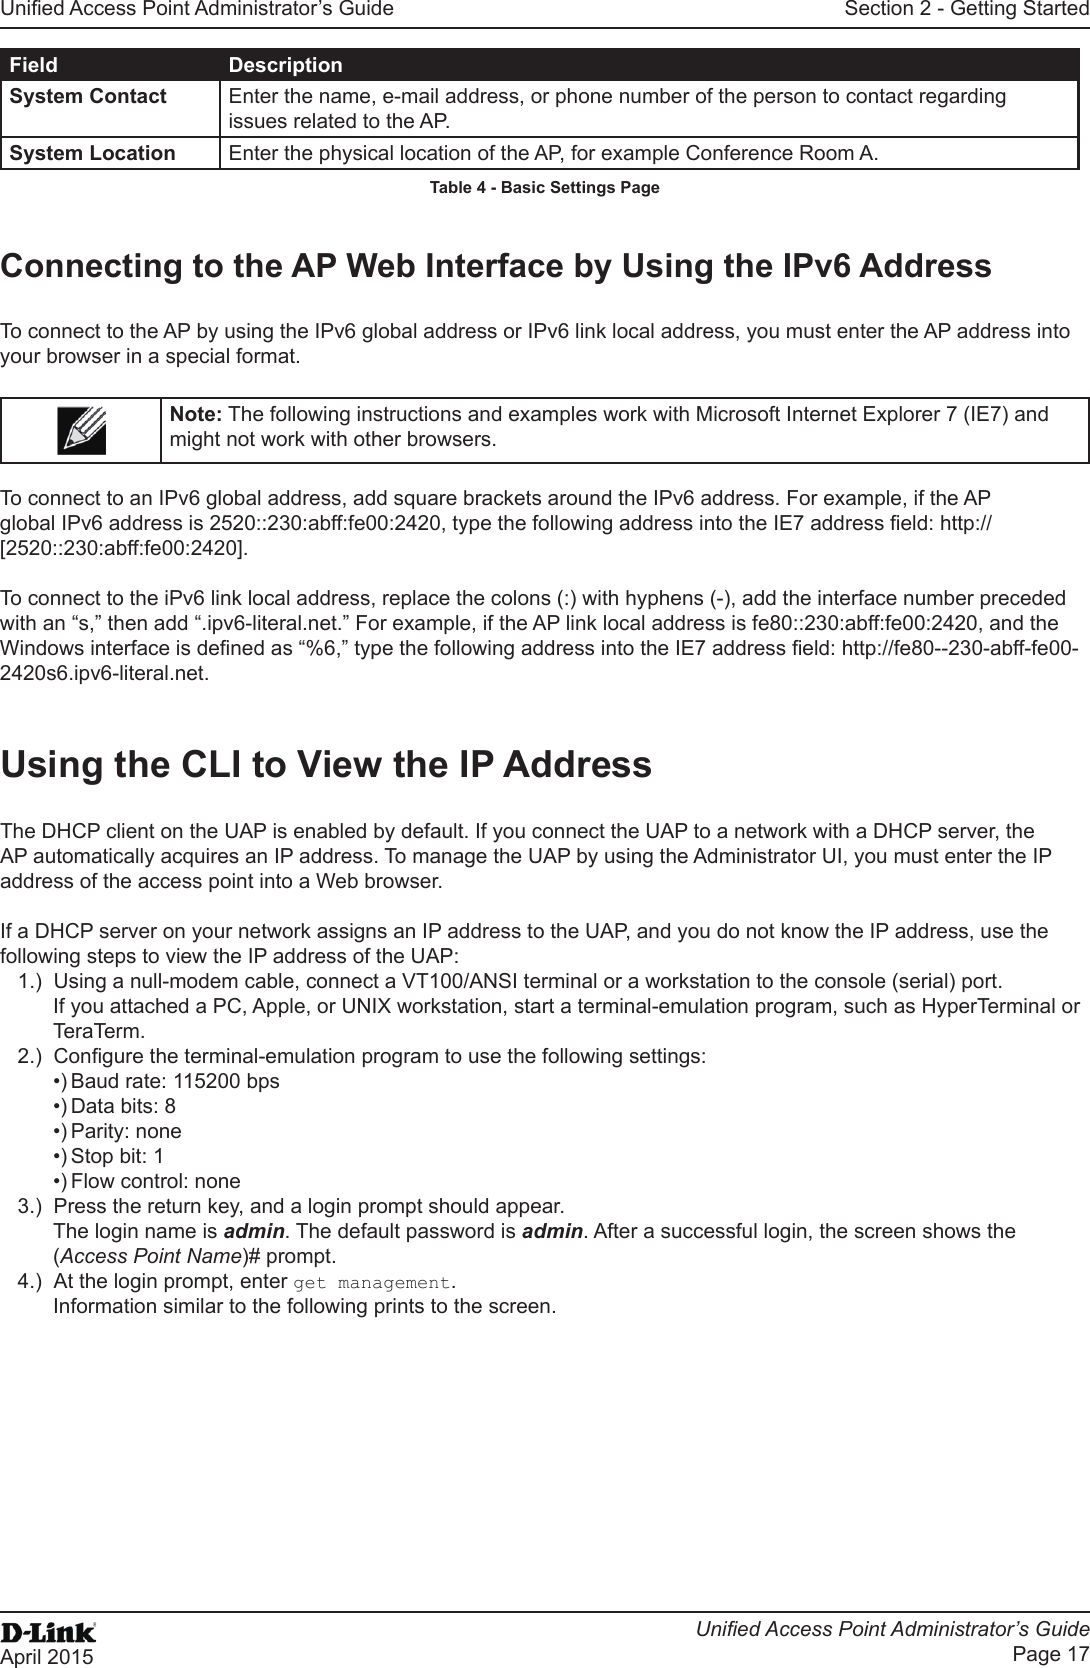 Unied Access Point Administrator’s GuideUnied Access Point Administrator’s GuidePage 17April 2015Section 2 - Getting StartedField DescriptionSystem Contact Enter the name, e-mail address, or phone number of the person to contact regarding issues related to the AP.System Location Enter the physical location of the AP, for example Conference Room A.Table 4 - Basic Settings PageConnecting to the AP Web Interface by Using the IPv6 AddressTo connect to the AP by using the IPv6 global address or IPv6 link local address, you must enter the AP address into your browser in a special format.Note: The following instructions and examples work with Microsoft Internet Explorer 7 (IE7) and might not work with other browsers.To connect to an IPv6 global address, add square brackets around the IPv6 address. For example, if the AP global IPv6 address is 2520::230:abff:fe00:2420, type the following address into the IE7 address eld: http://[2520::230:abff:fe00:2420].To connect to the iPv6 link local address, replace the colons (:) with hyphens (-), add the interface number preceded with an “s,” then add “.ipv6-literal.net.” For example, if the AP link local address is fe80::230:abff:fe00:2420, and the Windows interface is dened as “%6,” type the following address into the IE7 address eld: http://fe80--230-abff-fe00-2420s6.ipv6-literal.net.Using the CLI to View the IP AddressThe DHCP client on the UAP is enabled by default. If you connect the UAP to a network with a DHCP server, the AP automatically acquires an IP address. To manage the UAP by using the Administrator UI, you must enter the IP address of the access point into a Web browser. If a DHCP server on your network assigns an IP address to the UAP, and you do not know the IP address, use the following steps to view the IP address of the UAP:1.)  Using a null-modem cable, connect a VT100/ANSI terminal or a workstation to the console (serial) port.If you attached a PC, Apple, or UNIX workstation, start a terminal-emulation program, such as HyperTerminal or TeraTerm.2.)  Congure the terminal-emulation program to use the following settings:•) Baud rate: 115200 bps•) Data bits: 8•) Parity: none•) Stop bit: 1•) Flow control: none3.)  Press the return key, and a login prompt should appear.The login name is admin. The default password is admin. After a successful login, the screen shows the (Access Point Name)# prompt. 4.)  At the login prompt, enter get management.Information similar to the following prints to the screen.